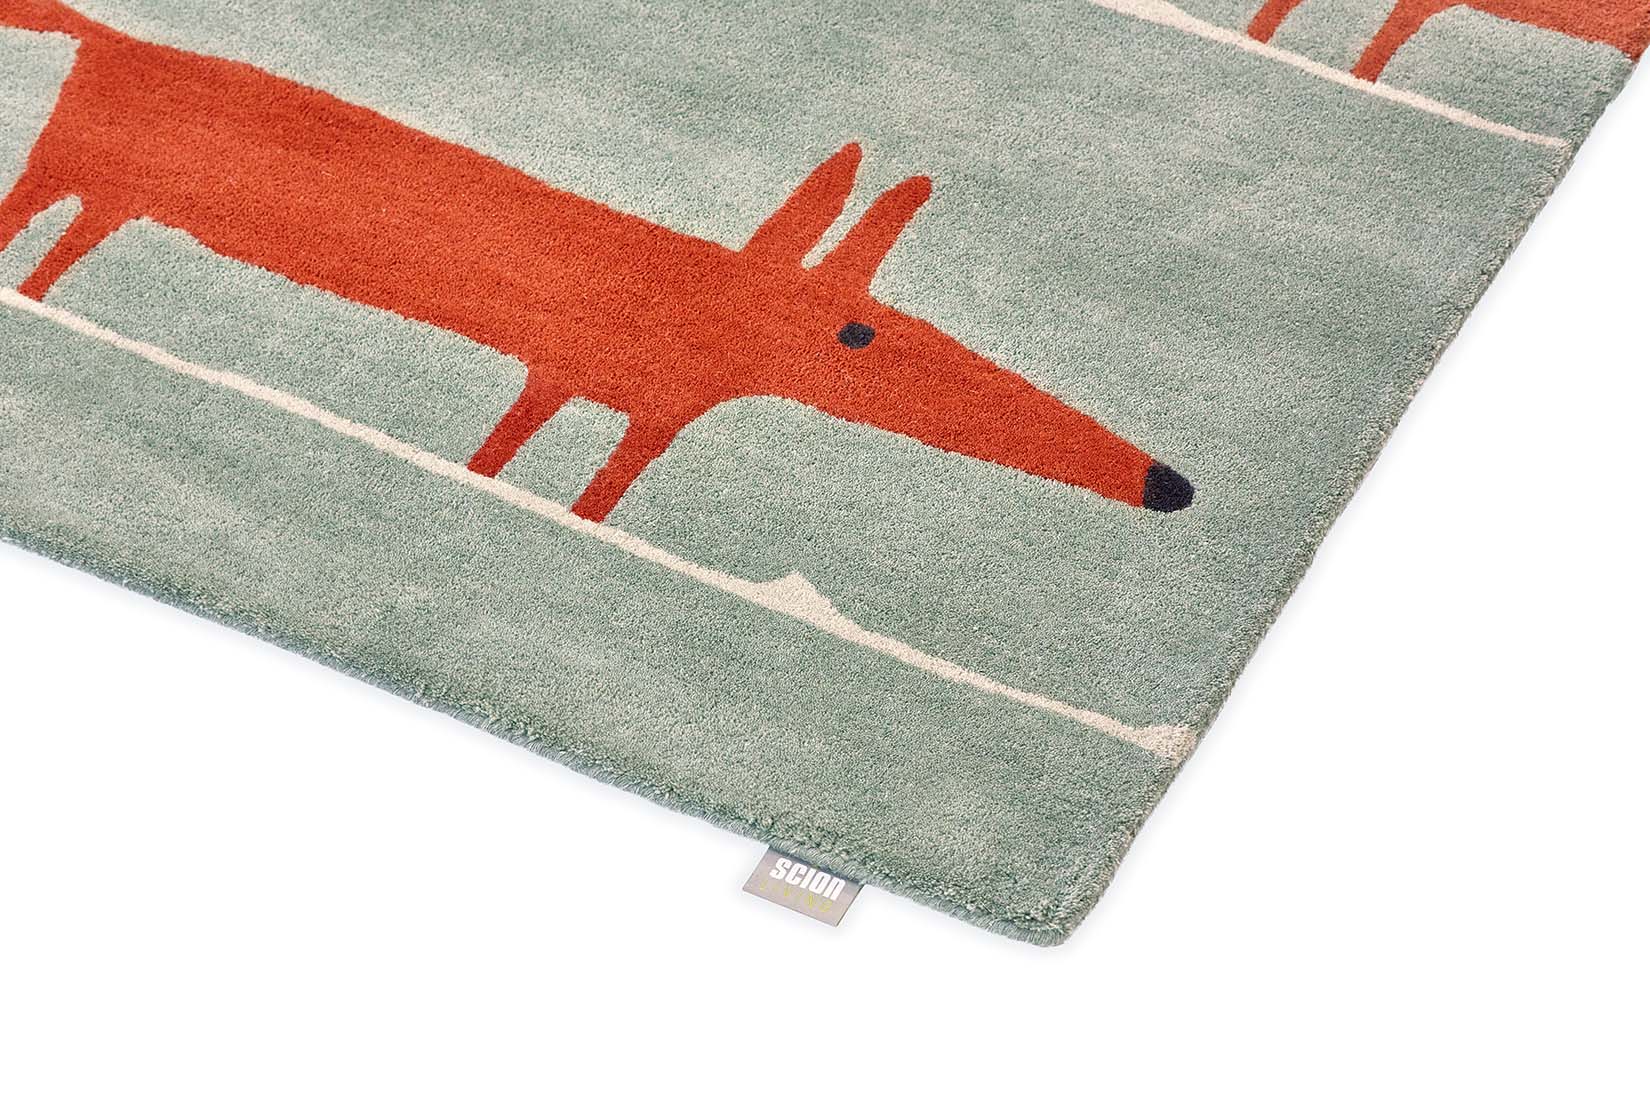 red and blue rug with fox print
